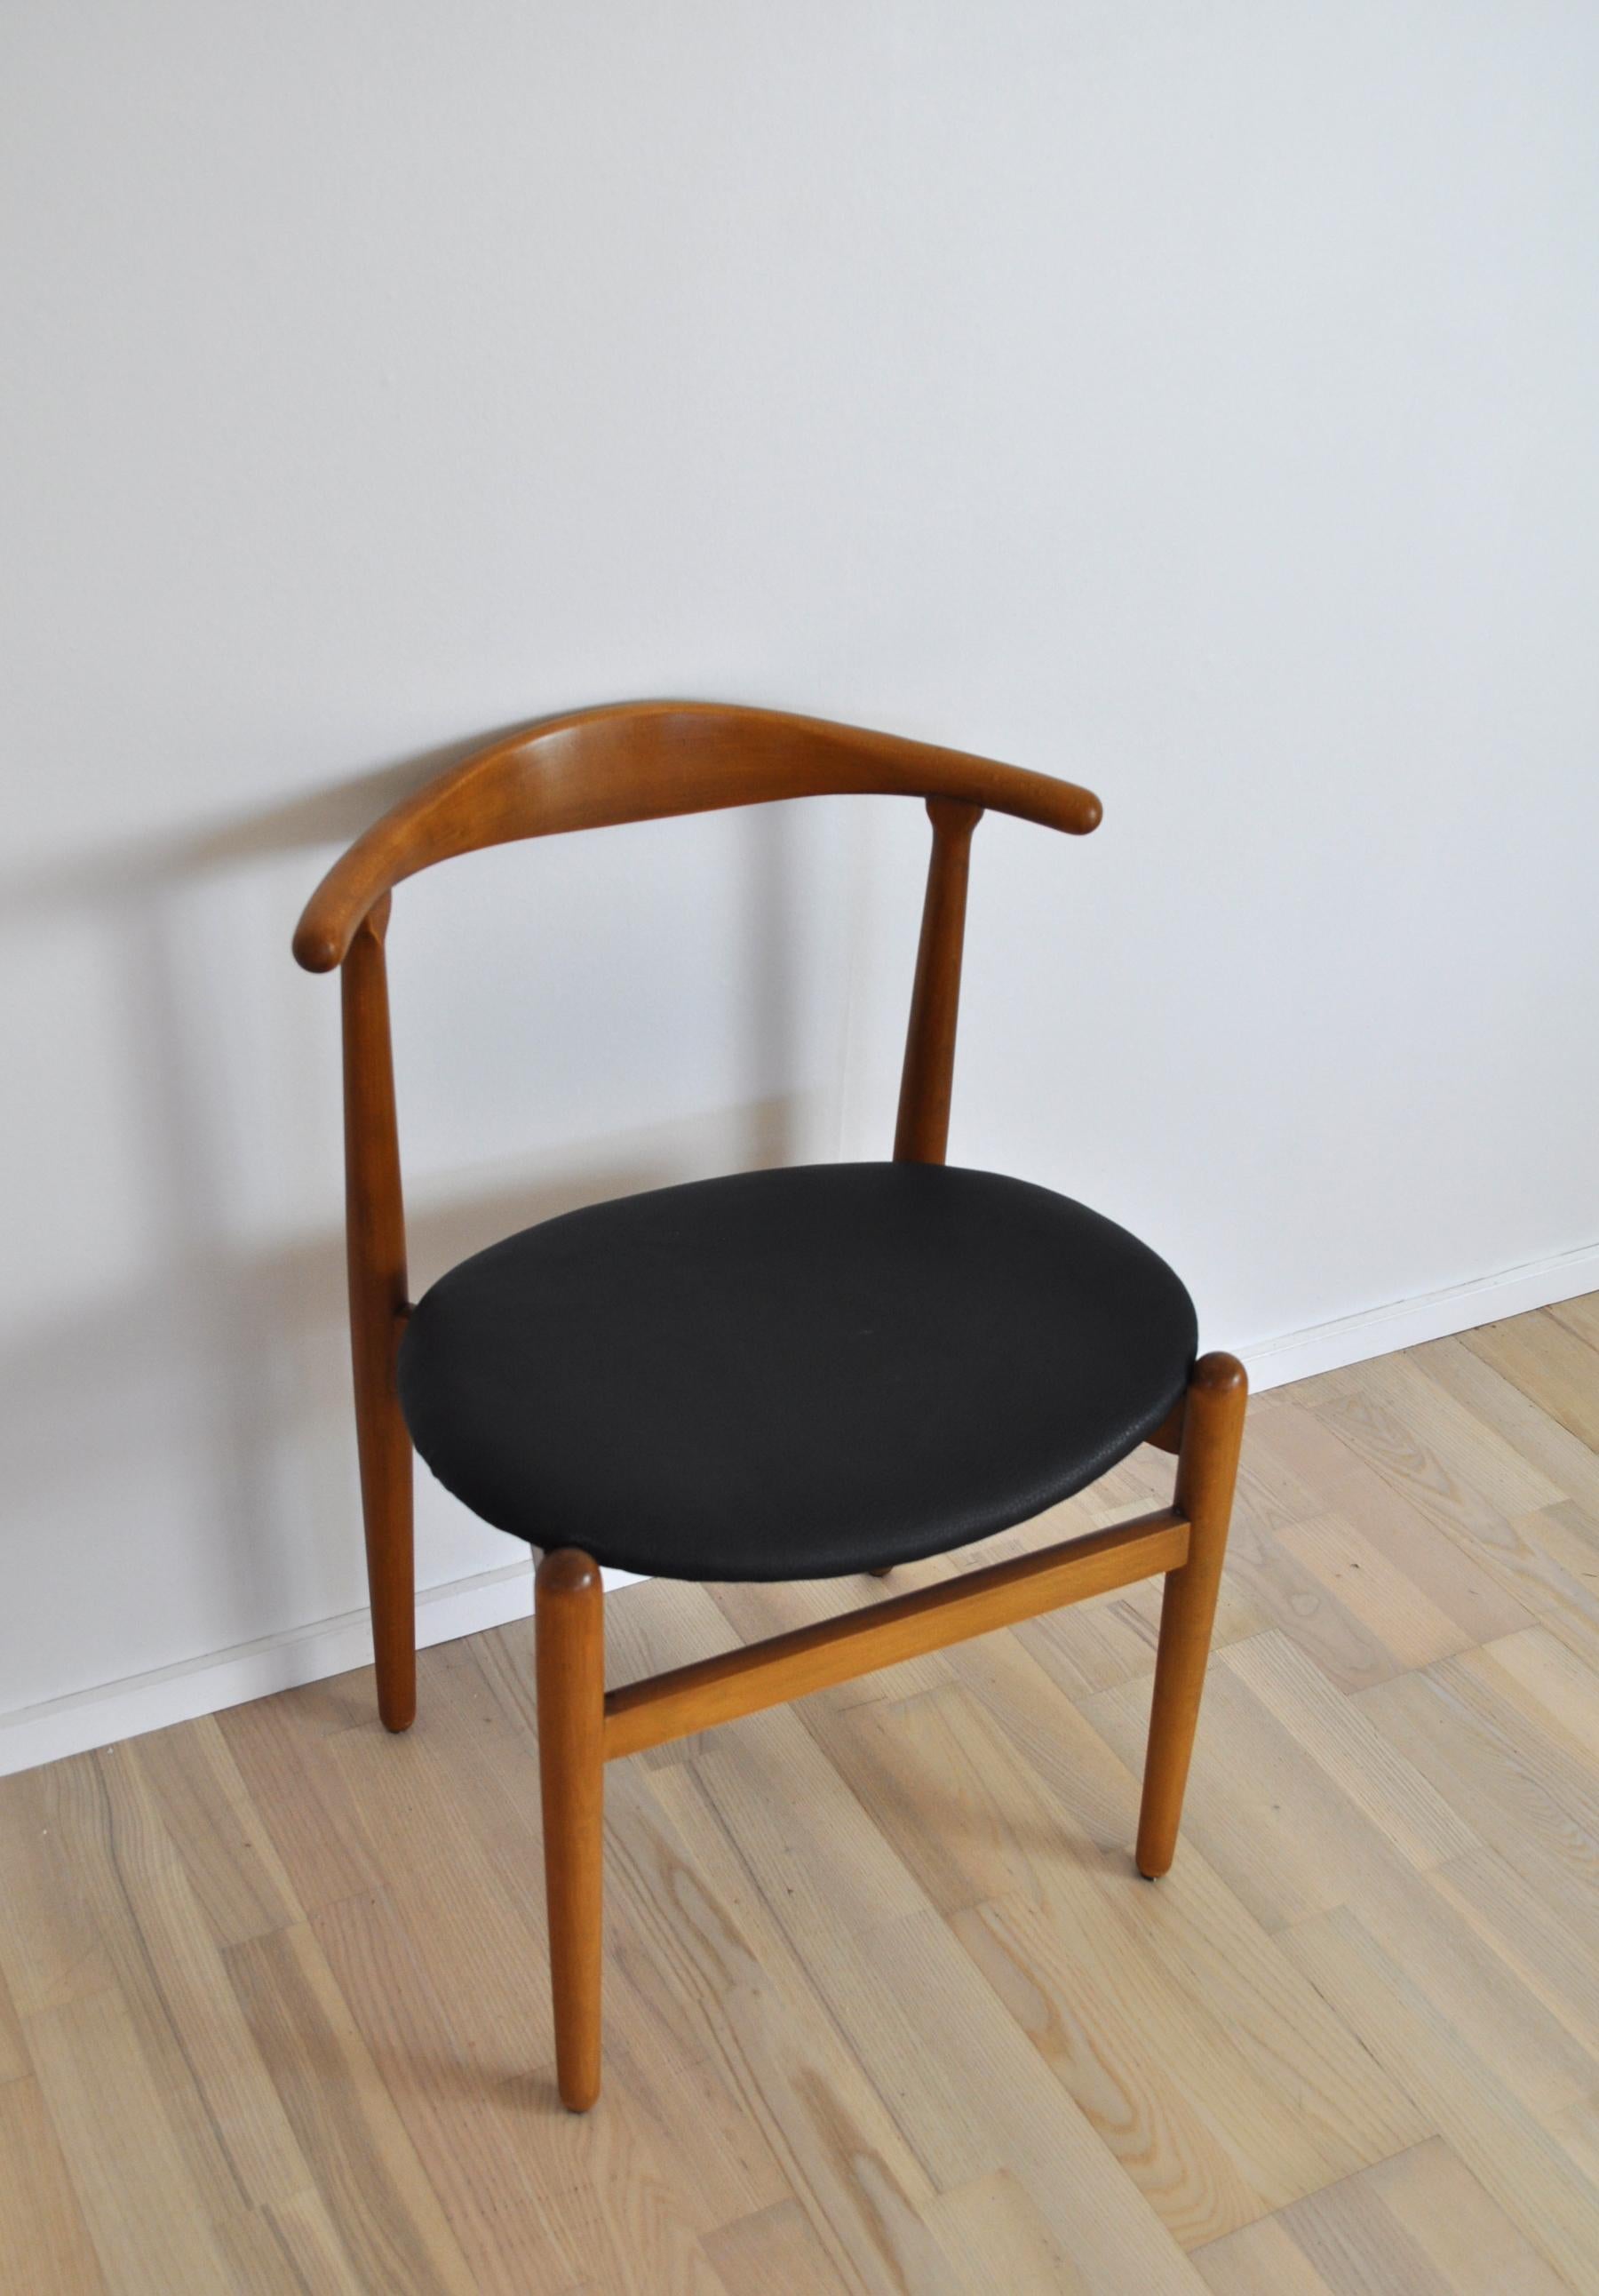 Solid beech armchair, newly upholstered in black faux leather. Design by Hans J. Wegner. Produced by Fritz Hansen. Designed in 1948, model no. 708 (not in production).